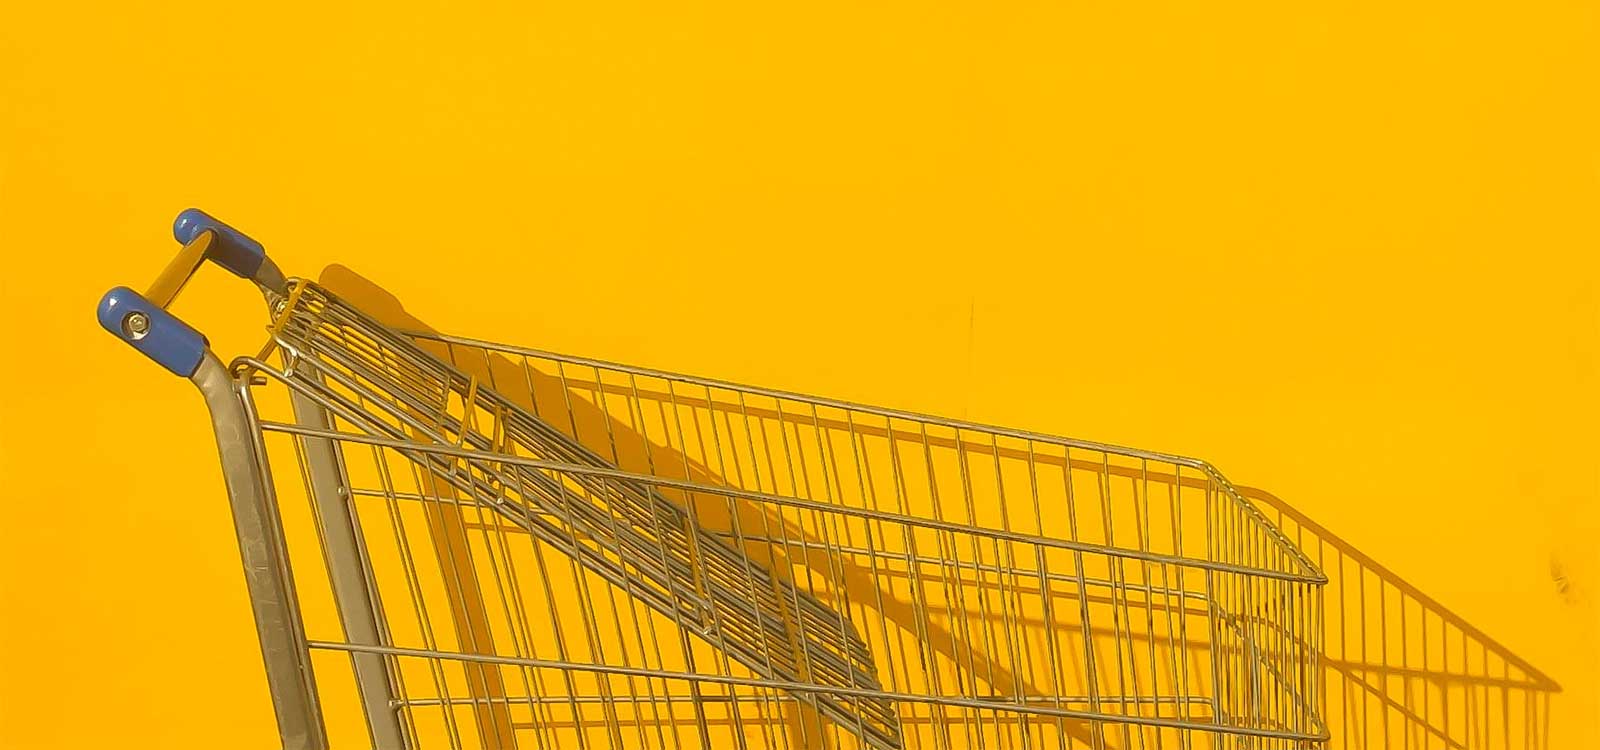 Shopping cart against a yellow wall.